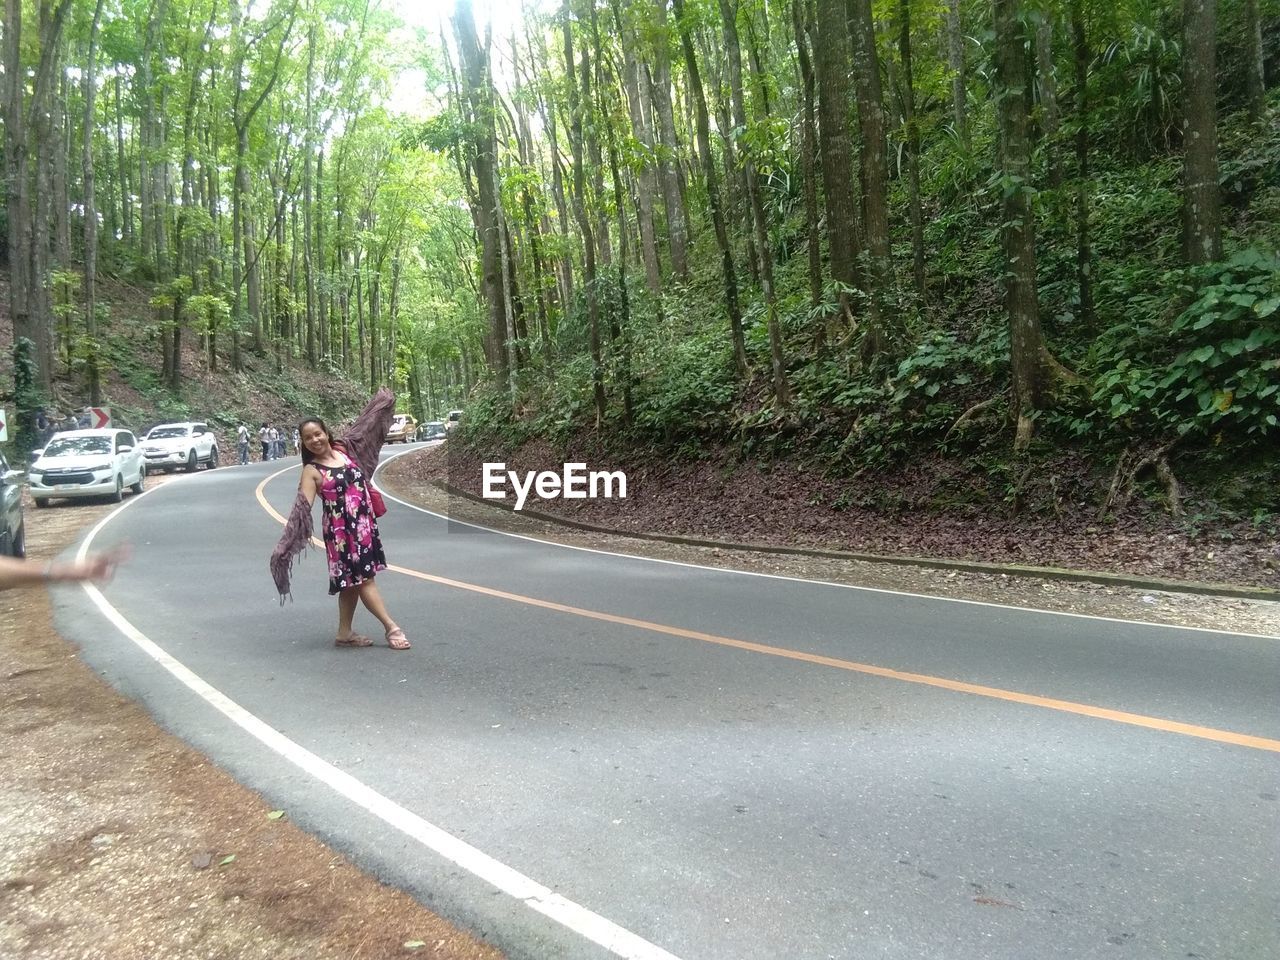 REAR VIEW OF WOMAN ON ROAD AMIDST TREES IN FOREST